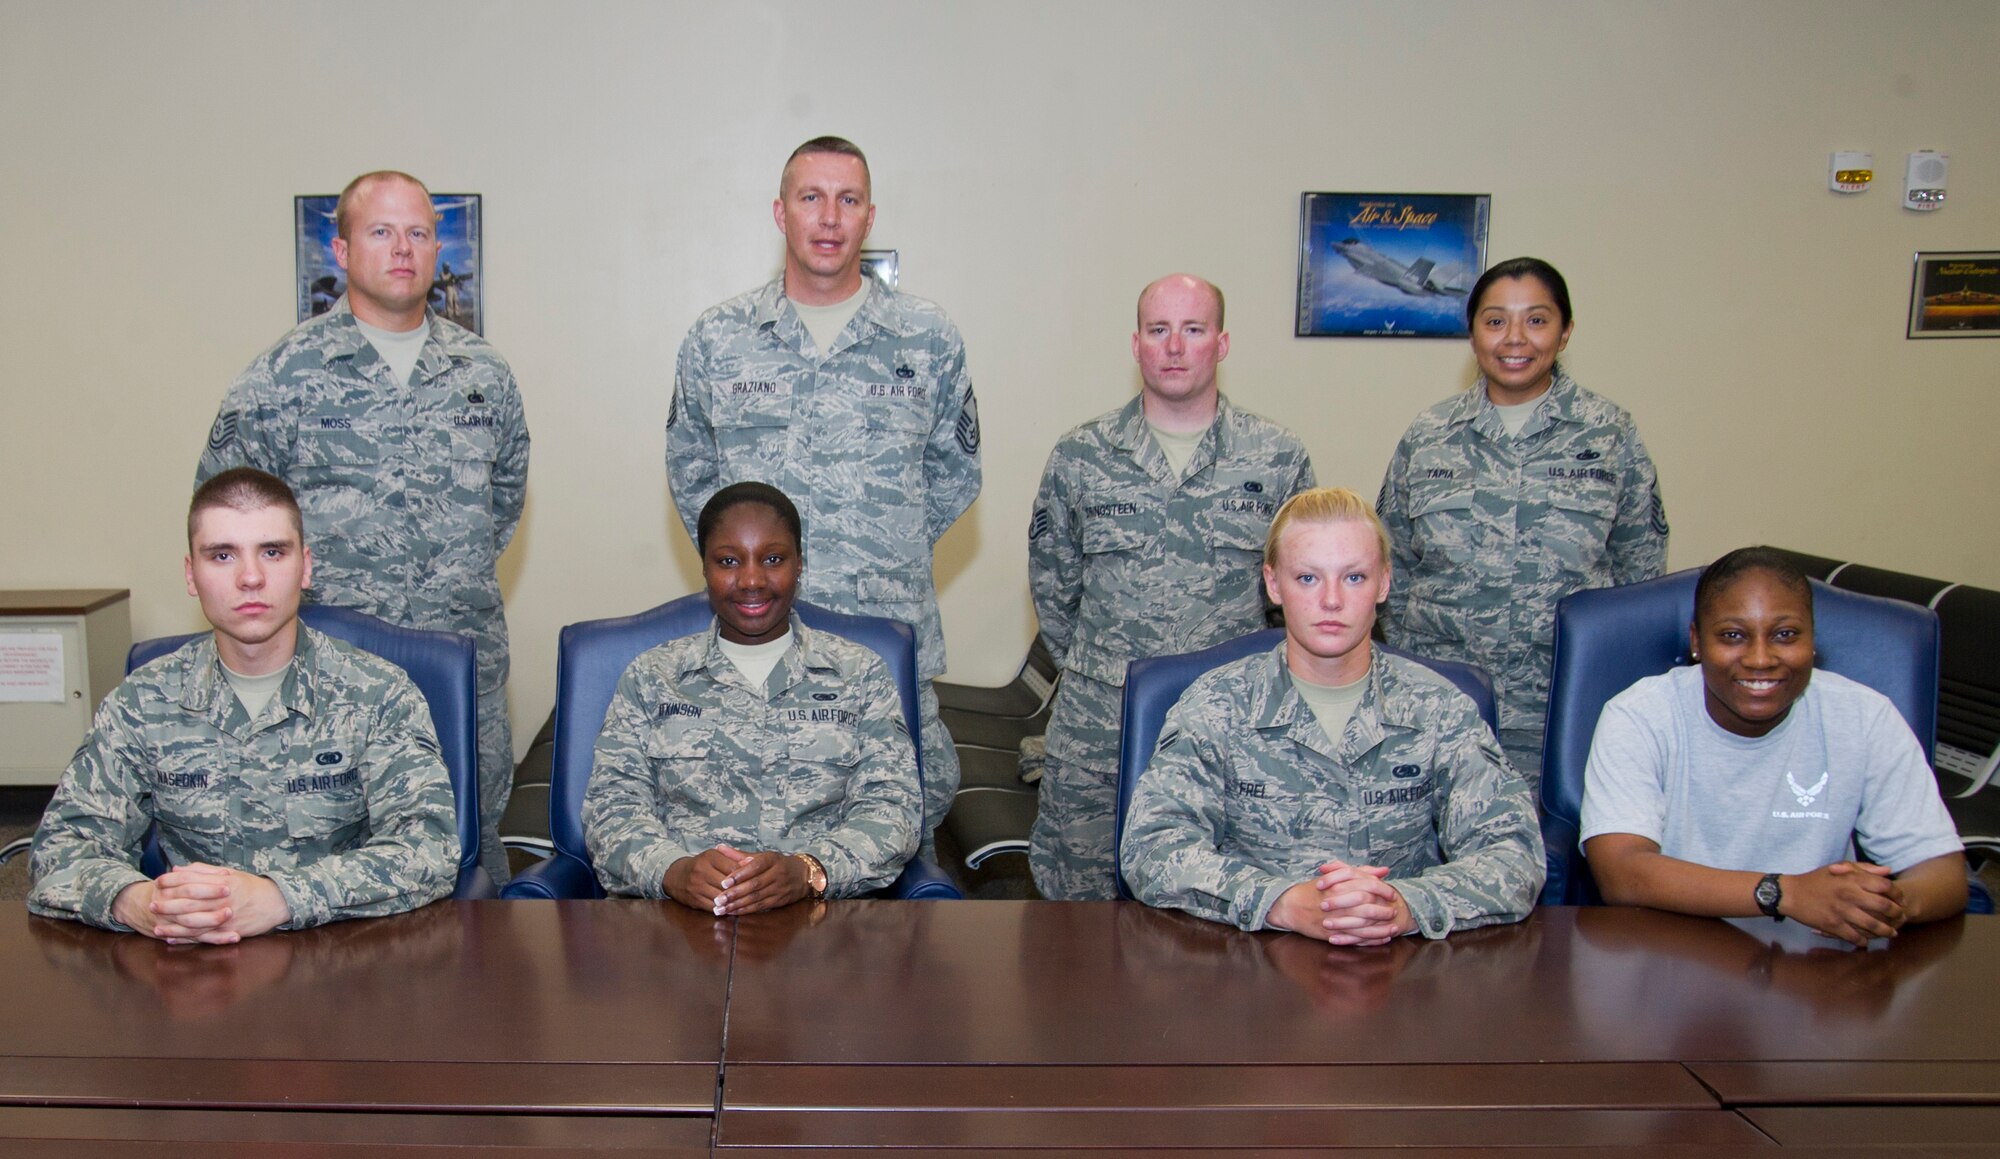 The 325th Logistics Readiness Squadron takes a group photo June 6. Top row from left to right: Tech. Sgt. Travis Moss, Senior Master Sgt. Frank Graziano, Staff Sgt. Michael Sprinsteen. Bottom row from left to right: Airman 1st Class Anton Nasedkin, Airman 1st Class Beatrice Atkinson, Airman 1st Class Megan Frei, Airman 1st Class Asia Bell. (U.S. Air Force photo by Airman 1st Class Sergio A. Gamboa)